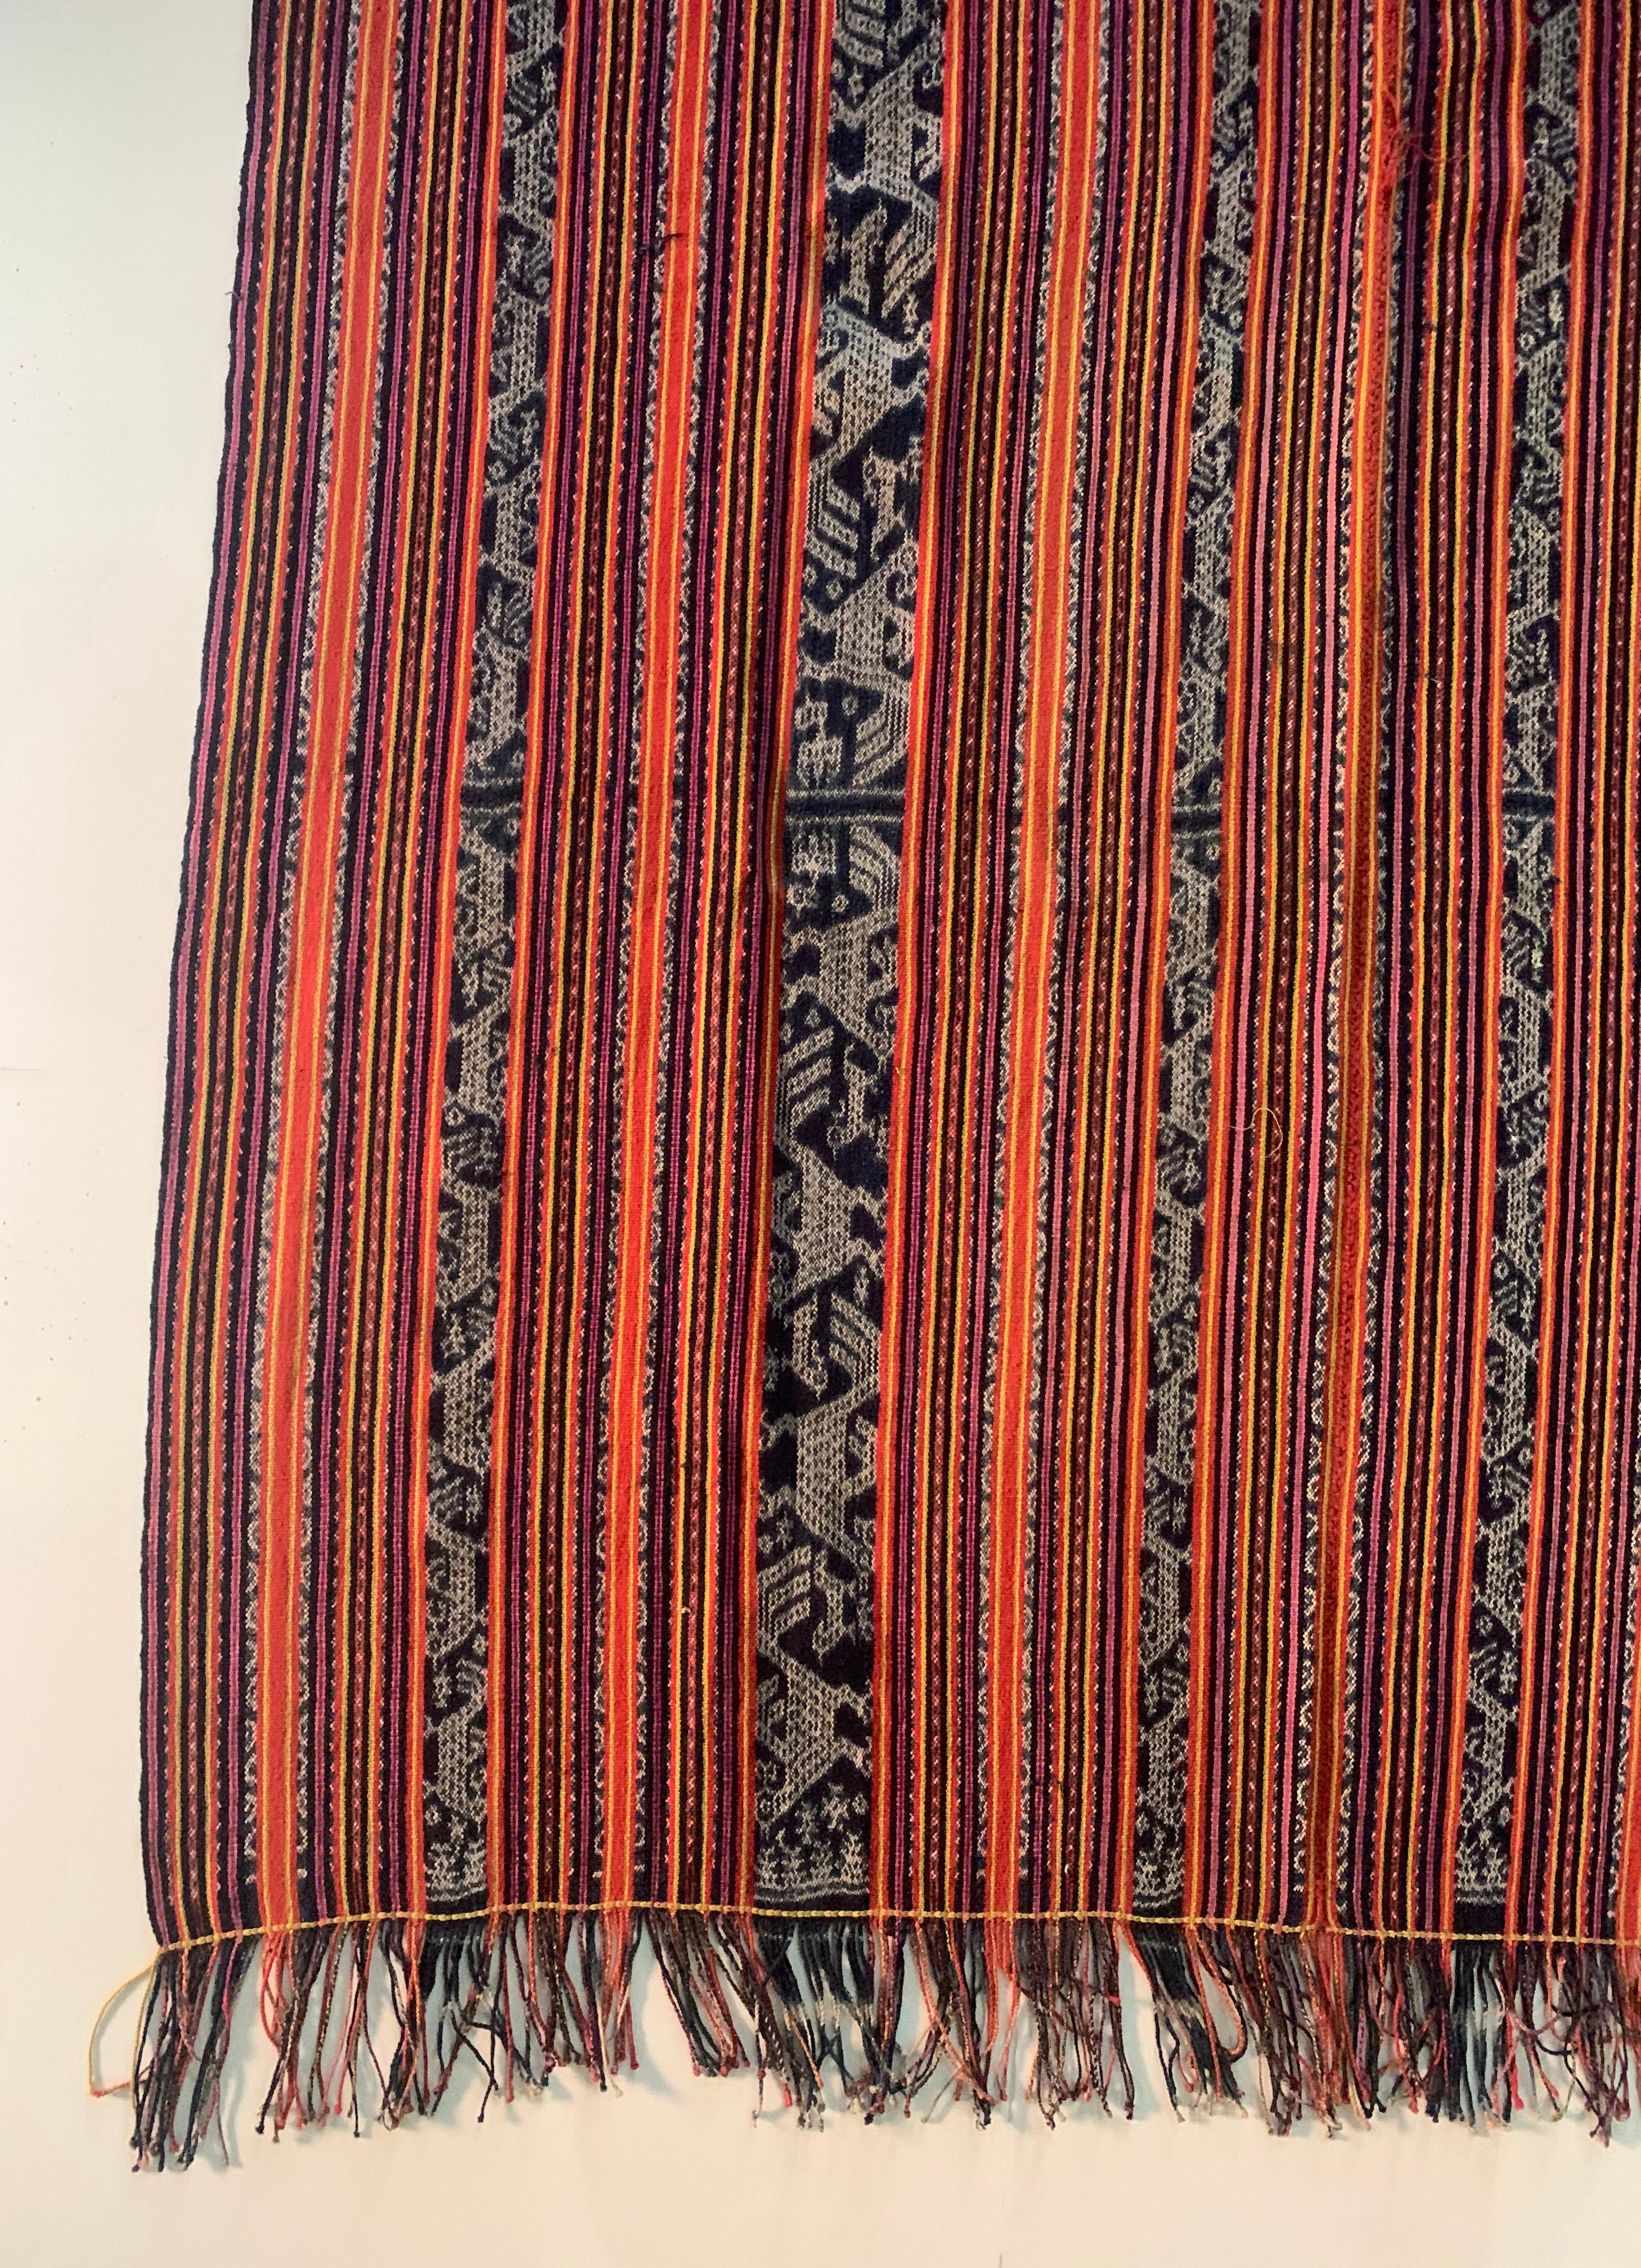 Yarn Ikat Textile from Timor with Stunning Tribal Motifs & Colours, Indonesia